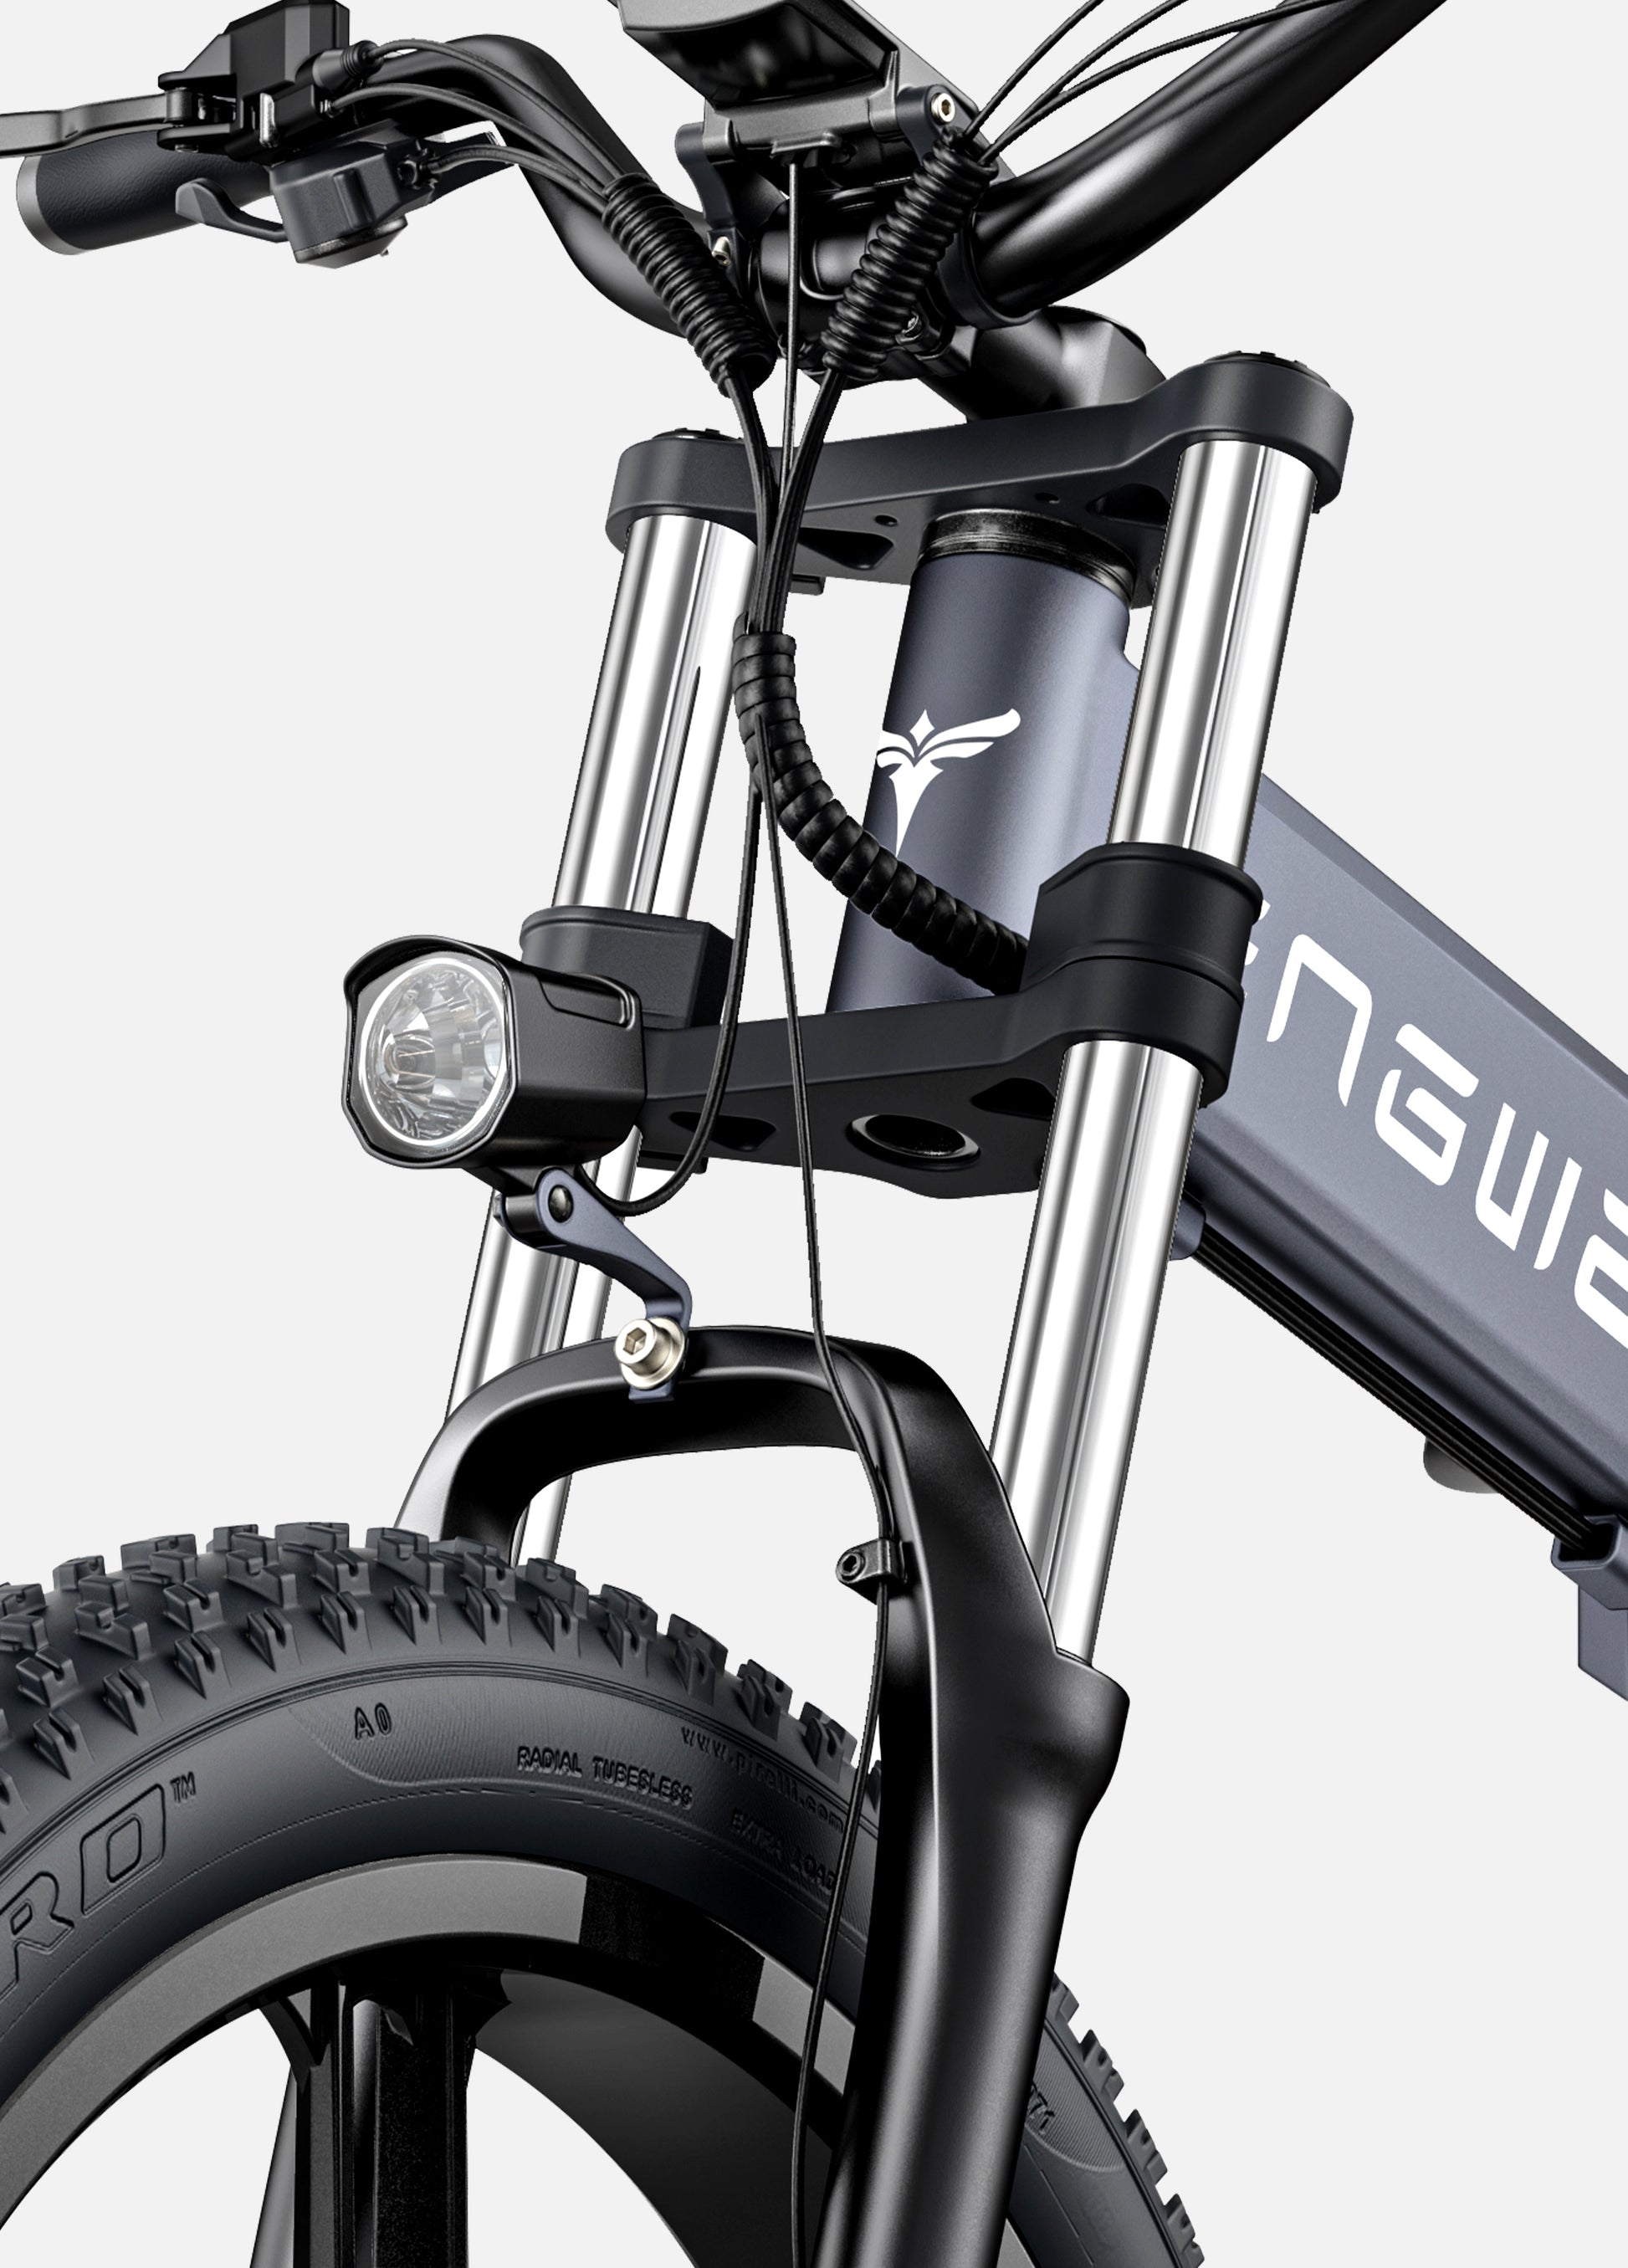 Close-up of Engwe X26's front suspension with hydraulic shock absorbers for enhanced stability on rough terrains.